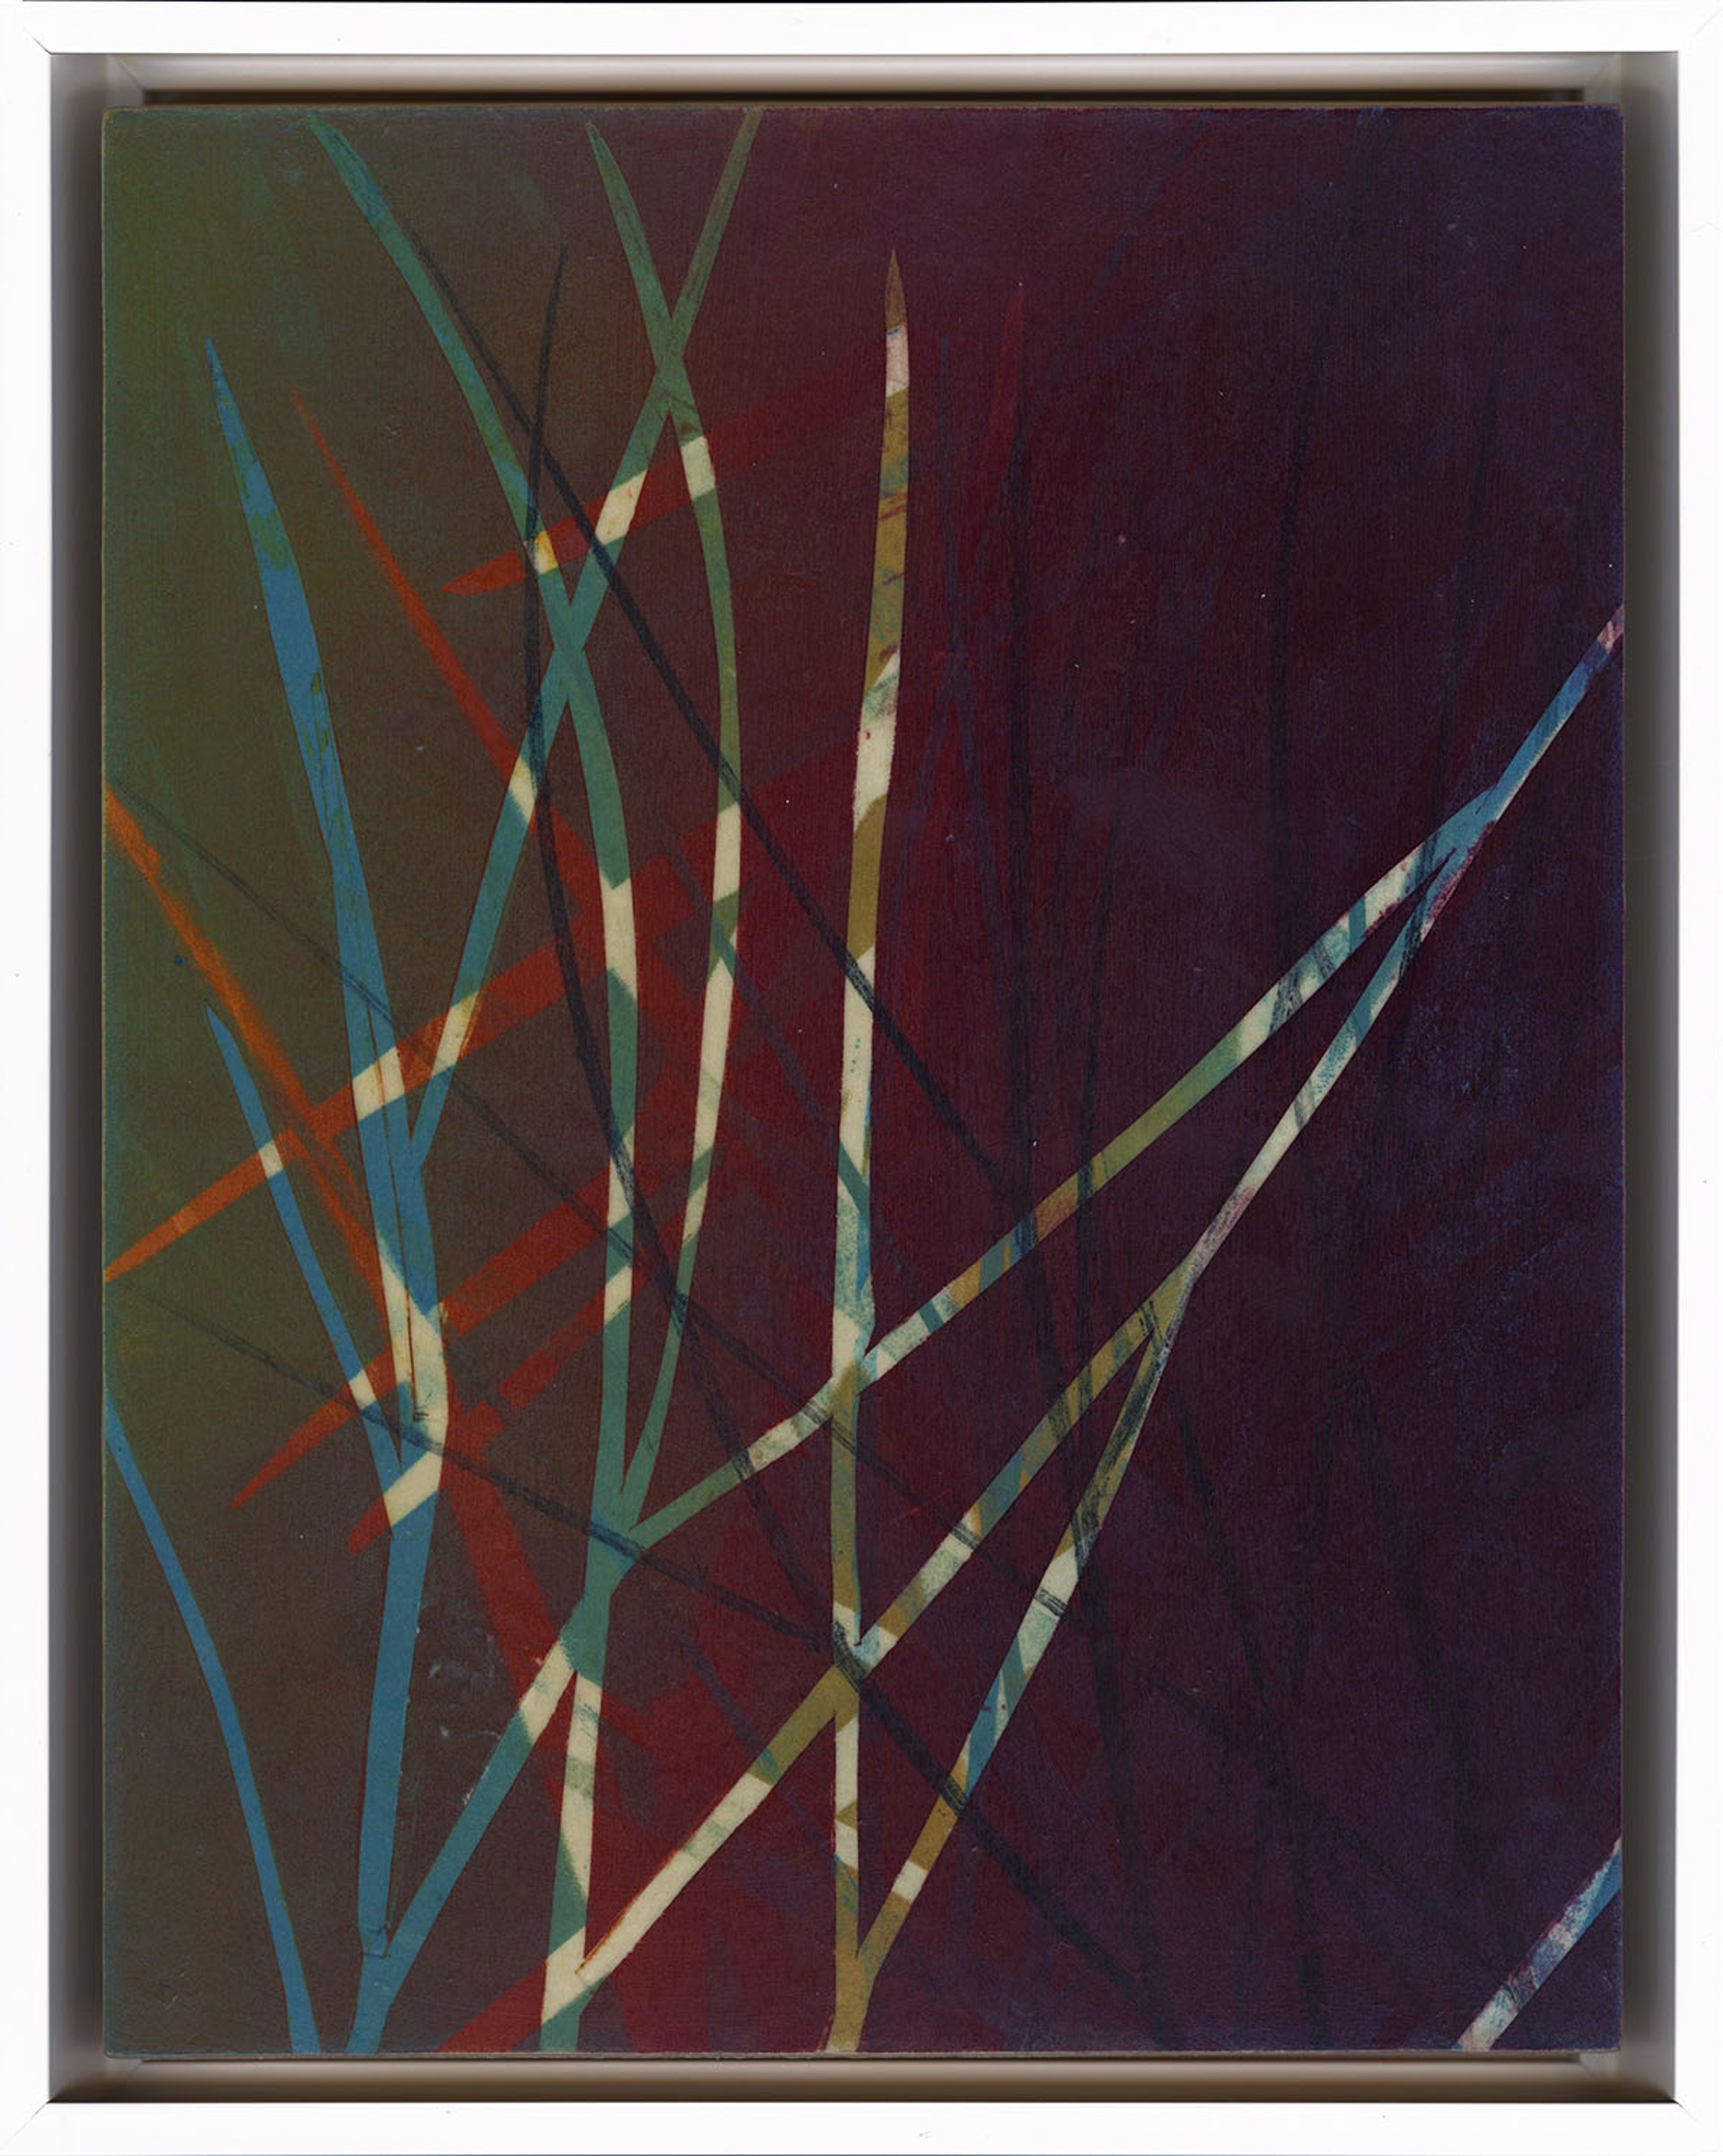 Original Monotype Print Featuring Grass Silhouette In Red And Blue Overlay